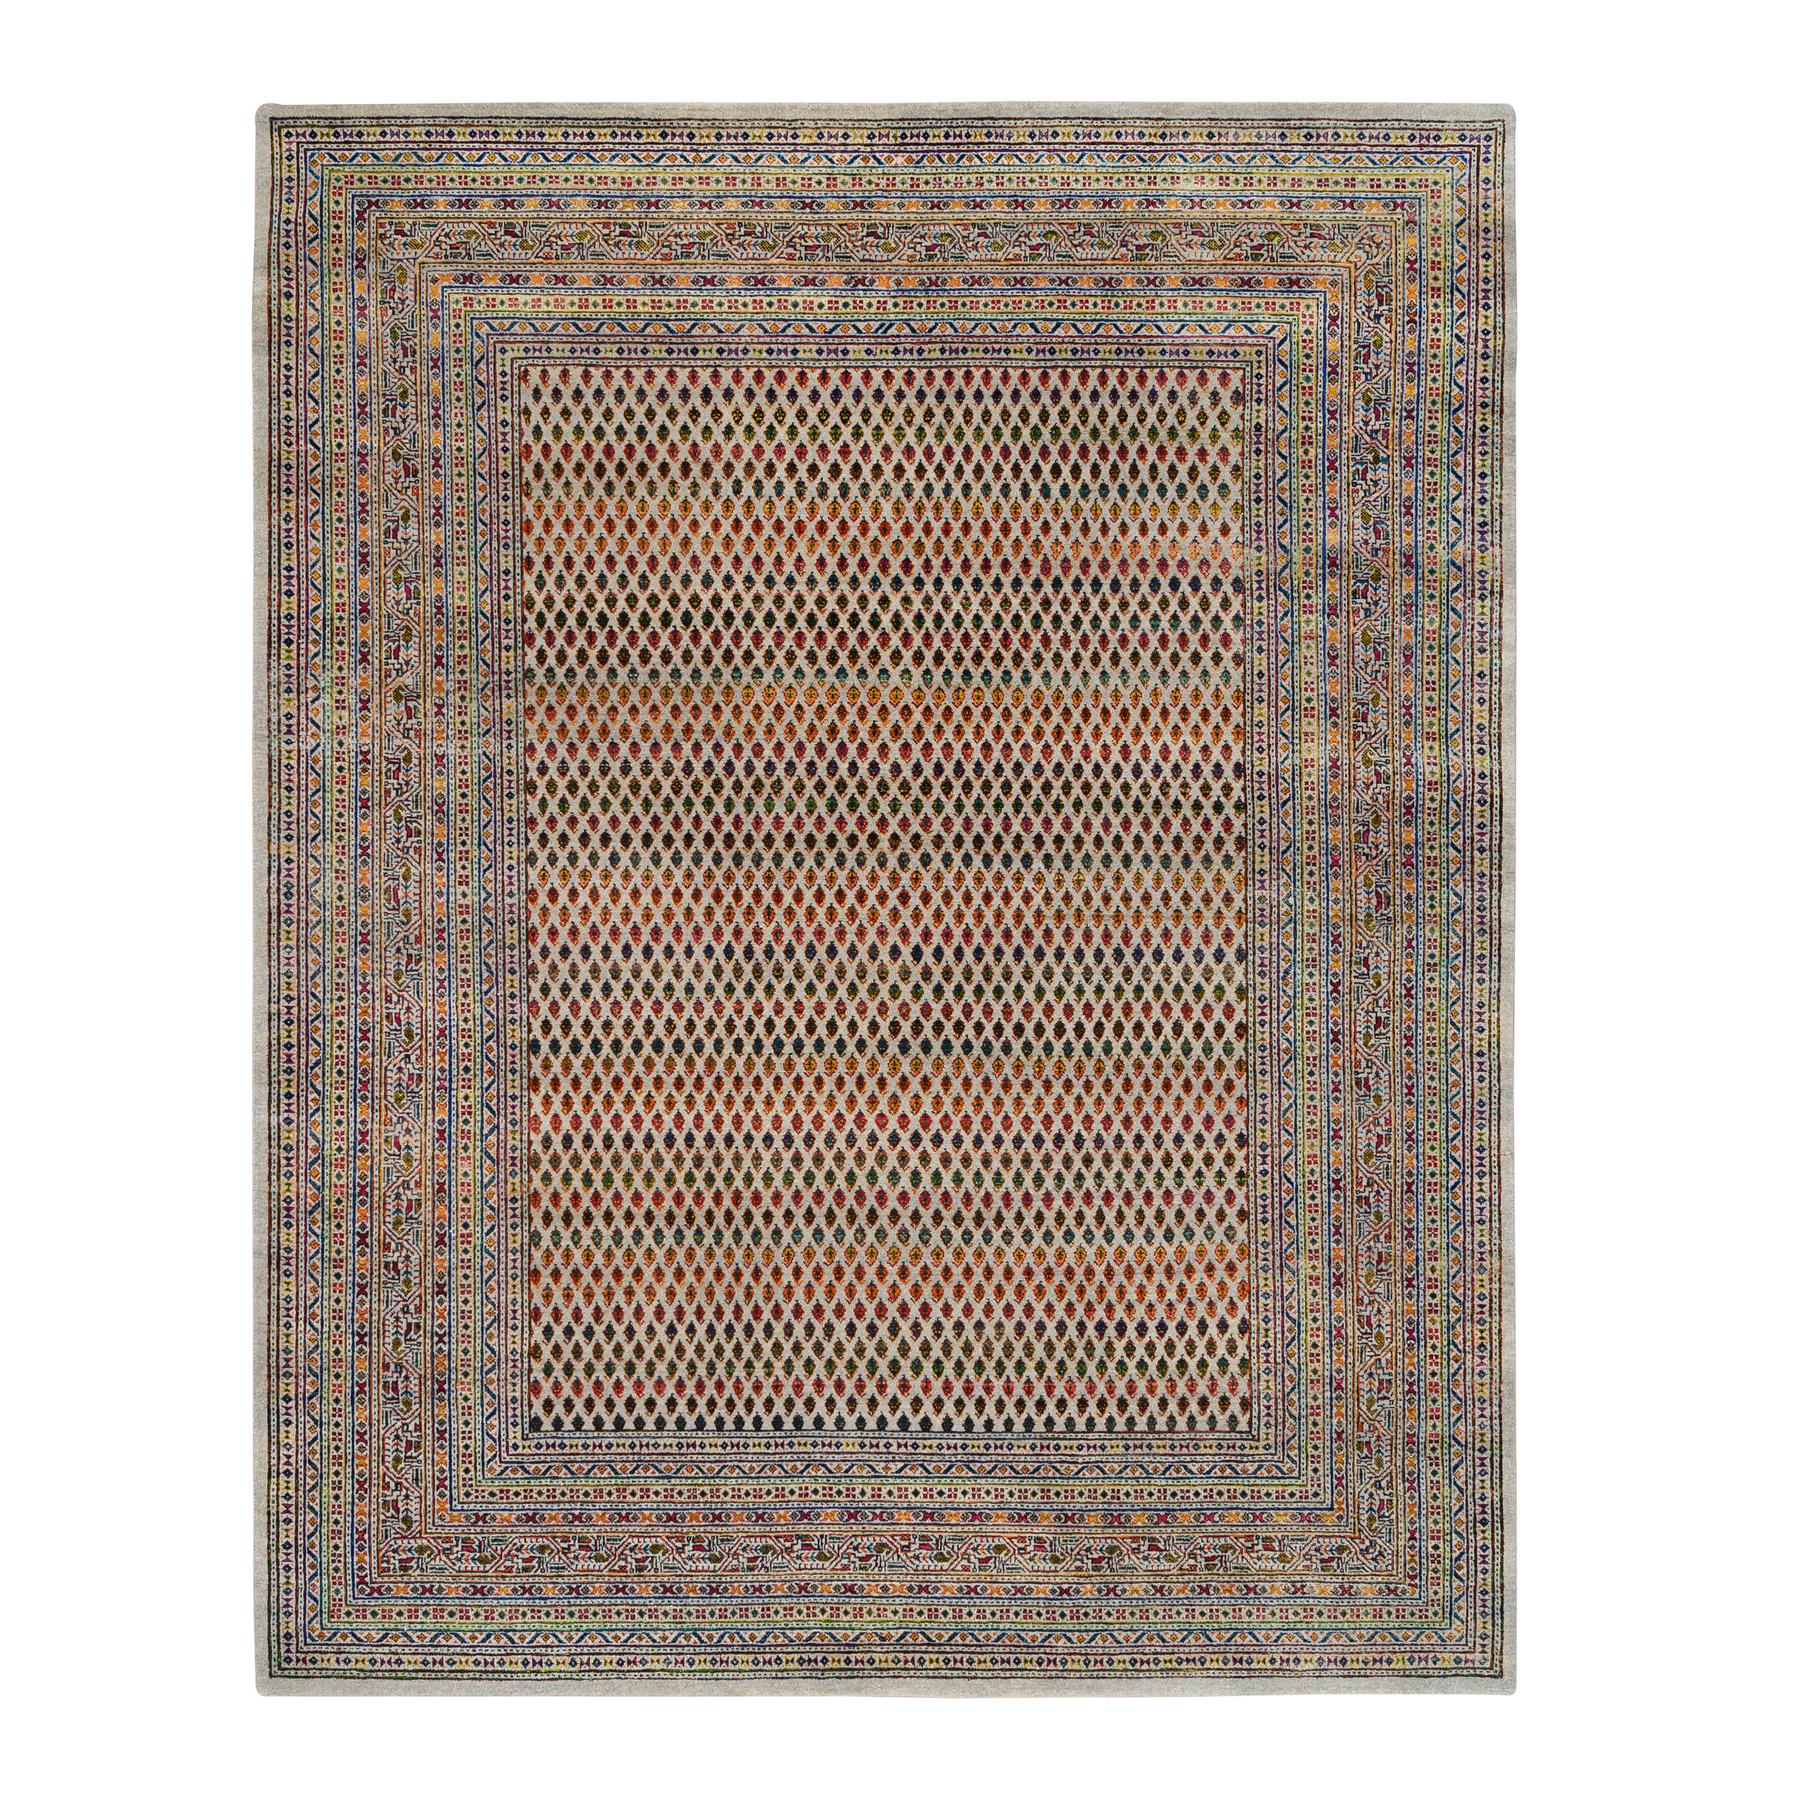 8'x10' Beige Sarouk Mir Inspired With Repetitive Boteh Design Colorful Wool And Sari Silk Hand Woven Oriental Rug 